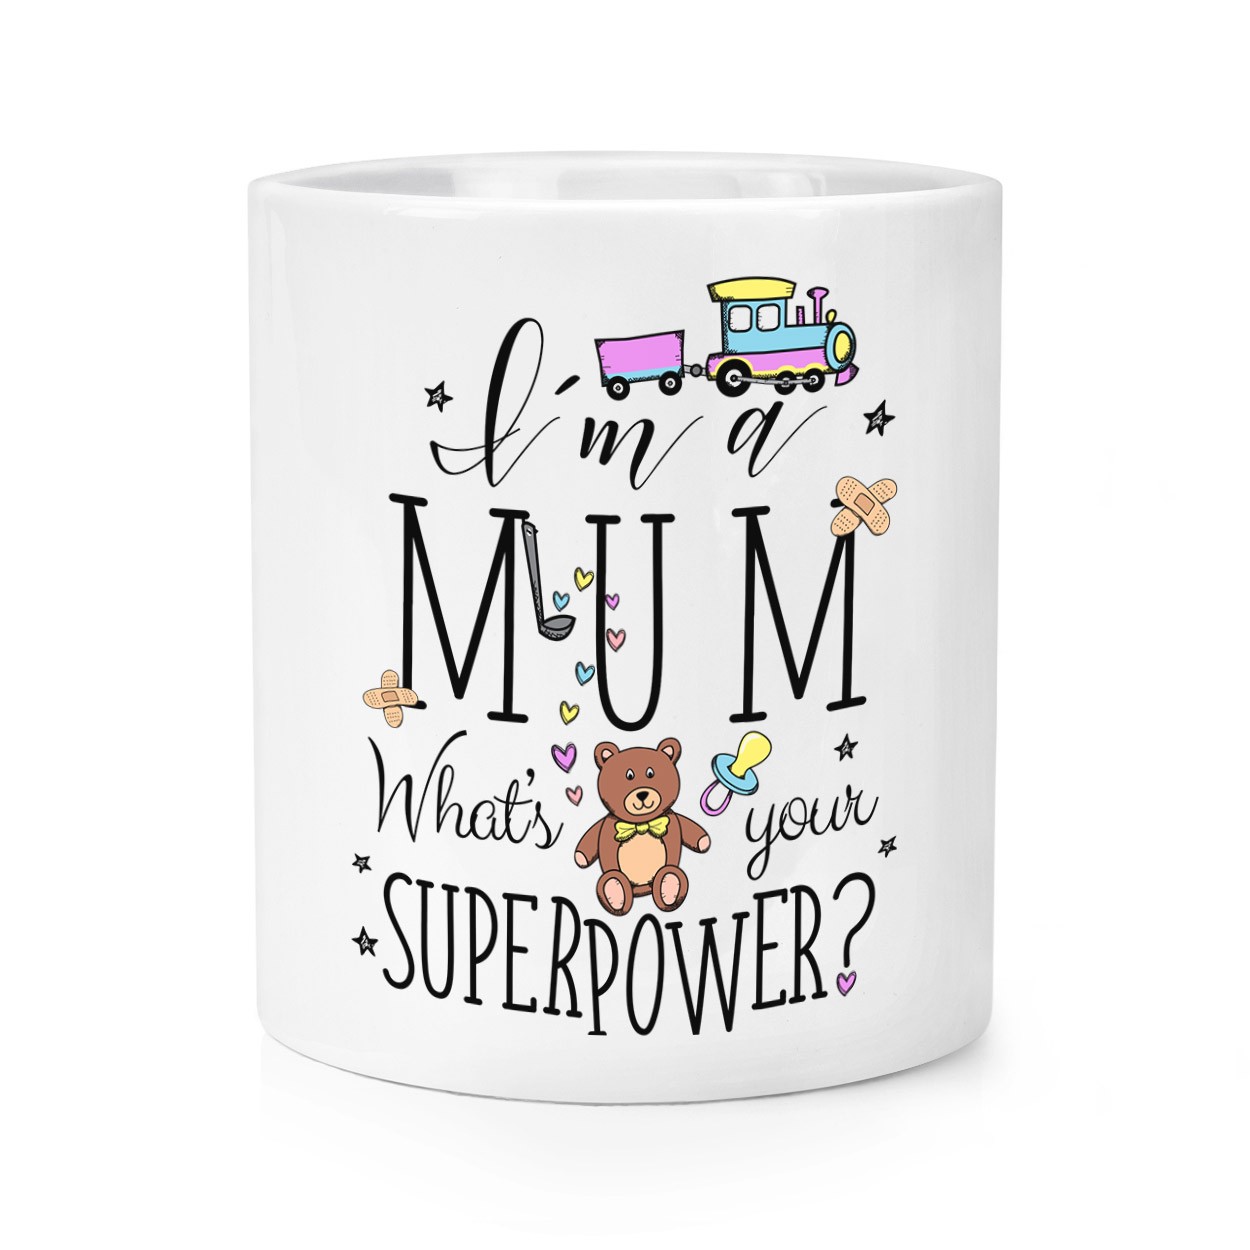 I'm A Mum What's Your Superpower Makeup Brush Pencil Pot